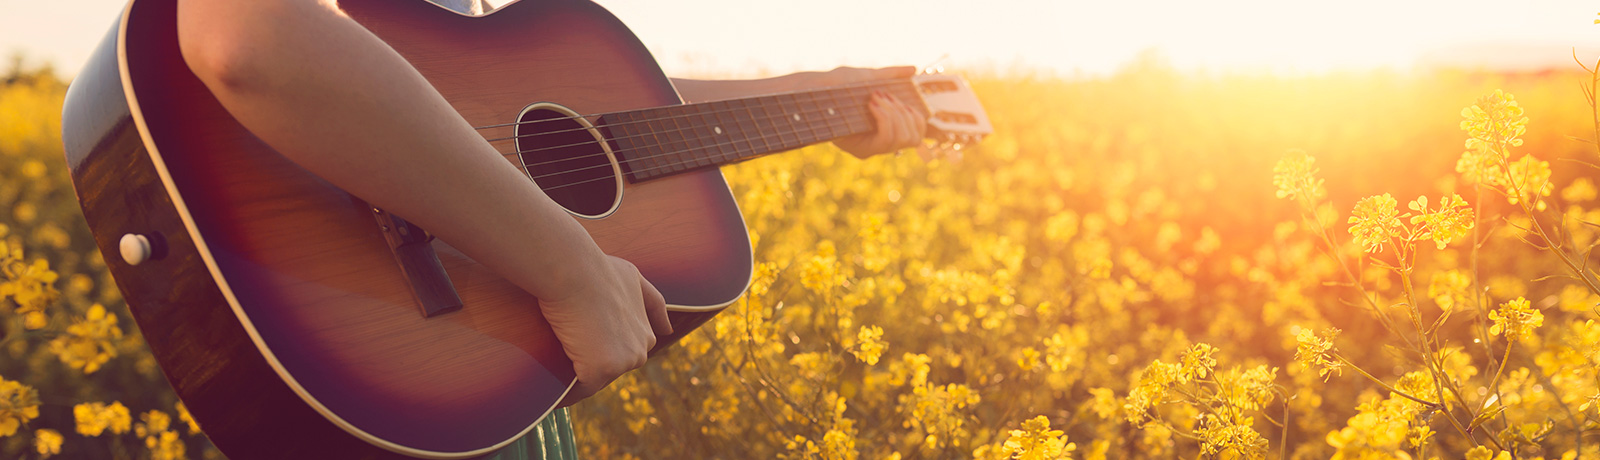 playing guitar in a field of yellow